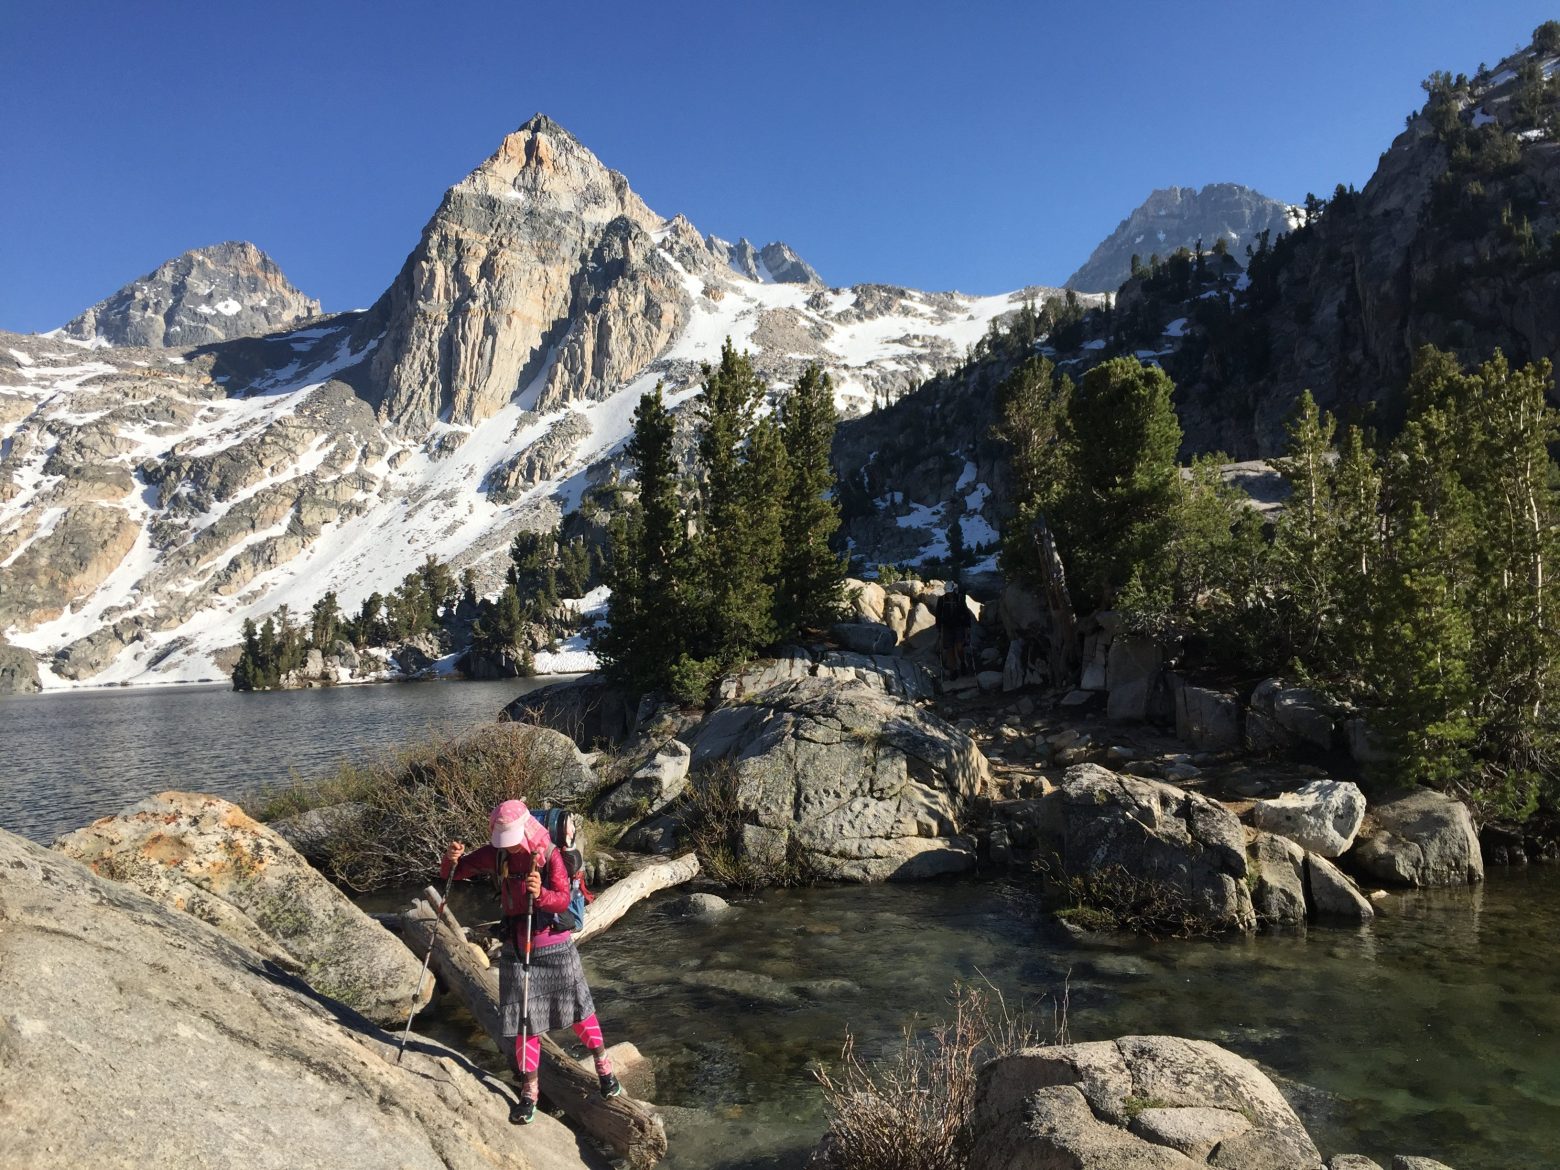 Sweet Pea, Rae Lakes, and the Painted Lady